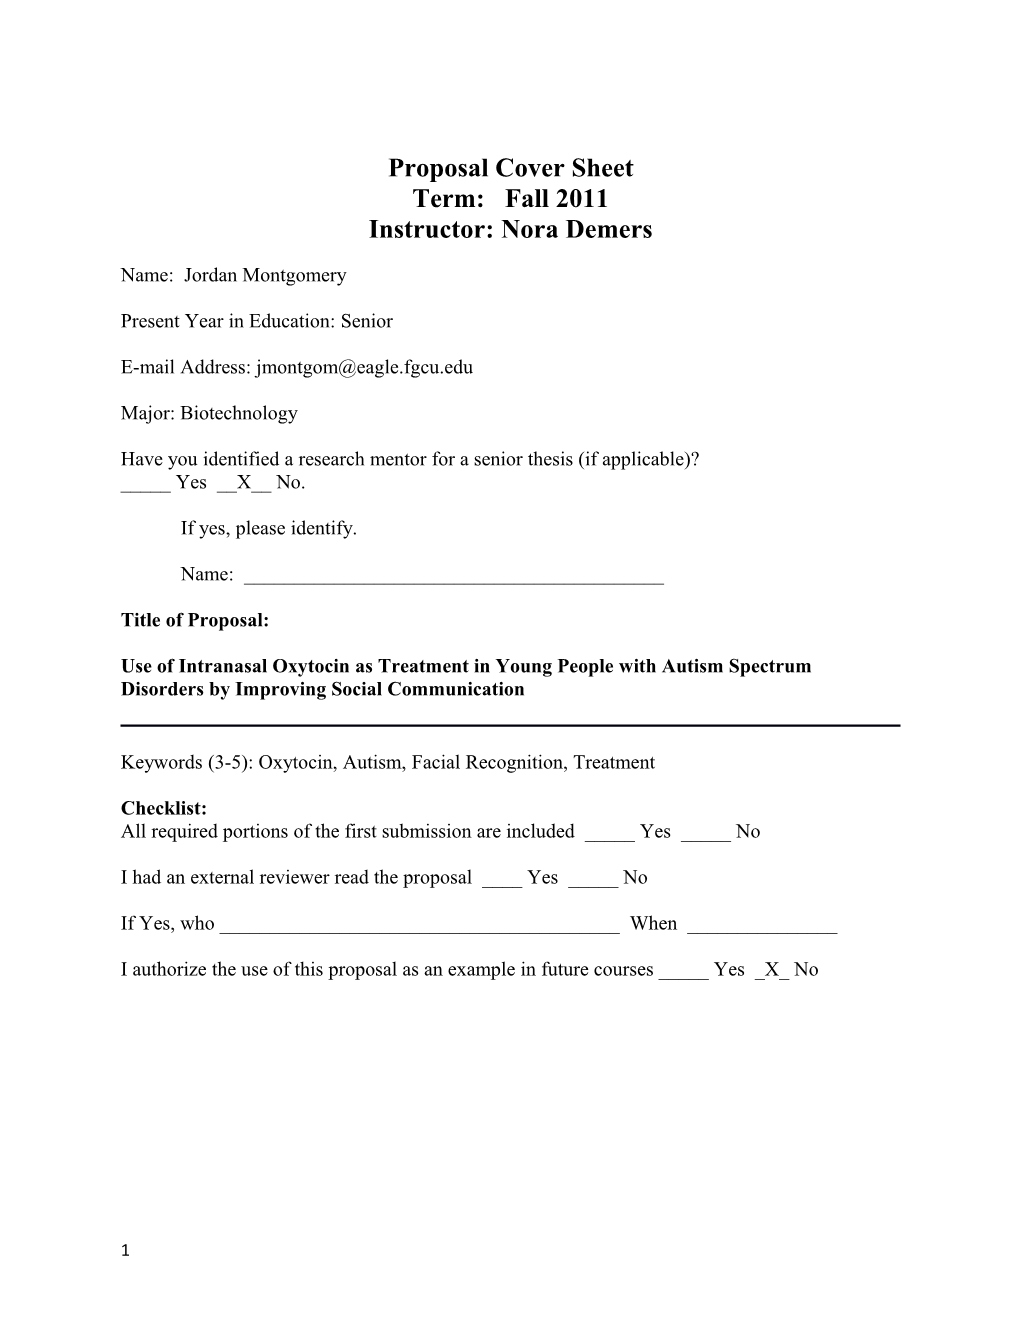 Proposal Cover Sheet